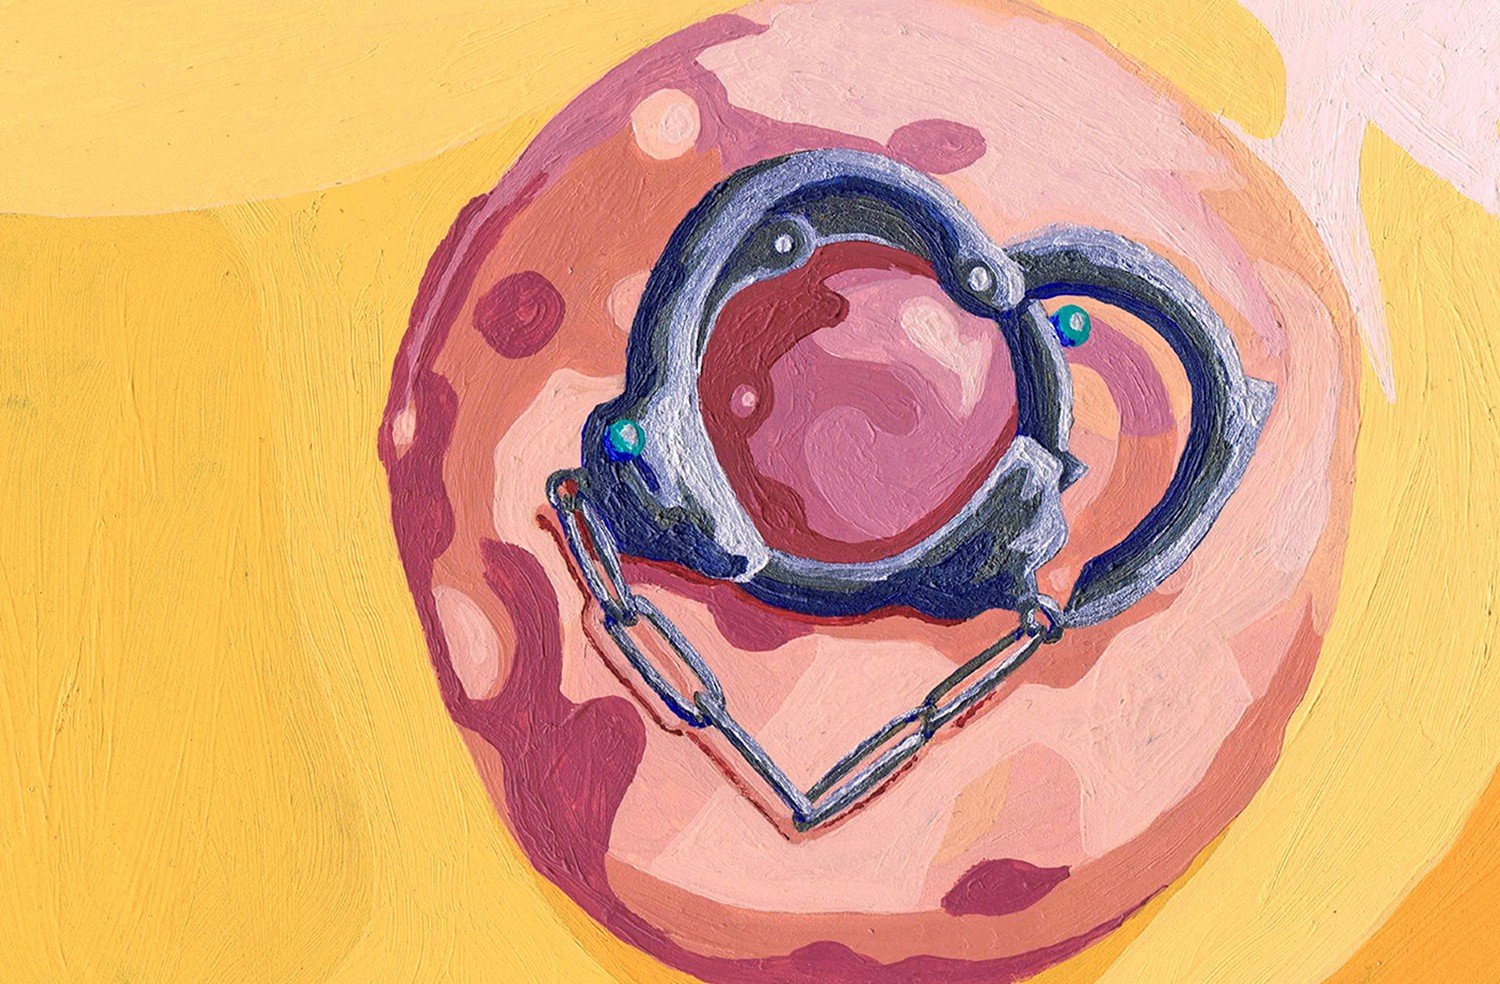 Photo by CRD Larson Art with the username @CRDLarson, who is a verified user,  September 3, 2019 at 9:39 AM. The post is about the topic Pierced Nipples and the text says ''Nipple Ring Handcuffs' - original erotic painting/body jewelry design.

Feedback welcome!

#nipple #nipplepiercing #handcuffs #eroticart #bodyjewelry #pierced #piercing'